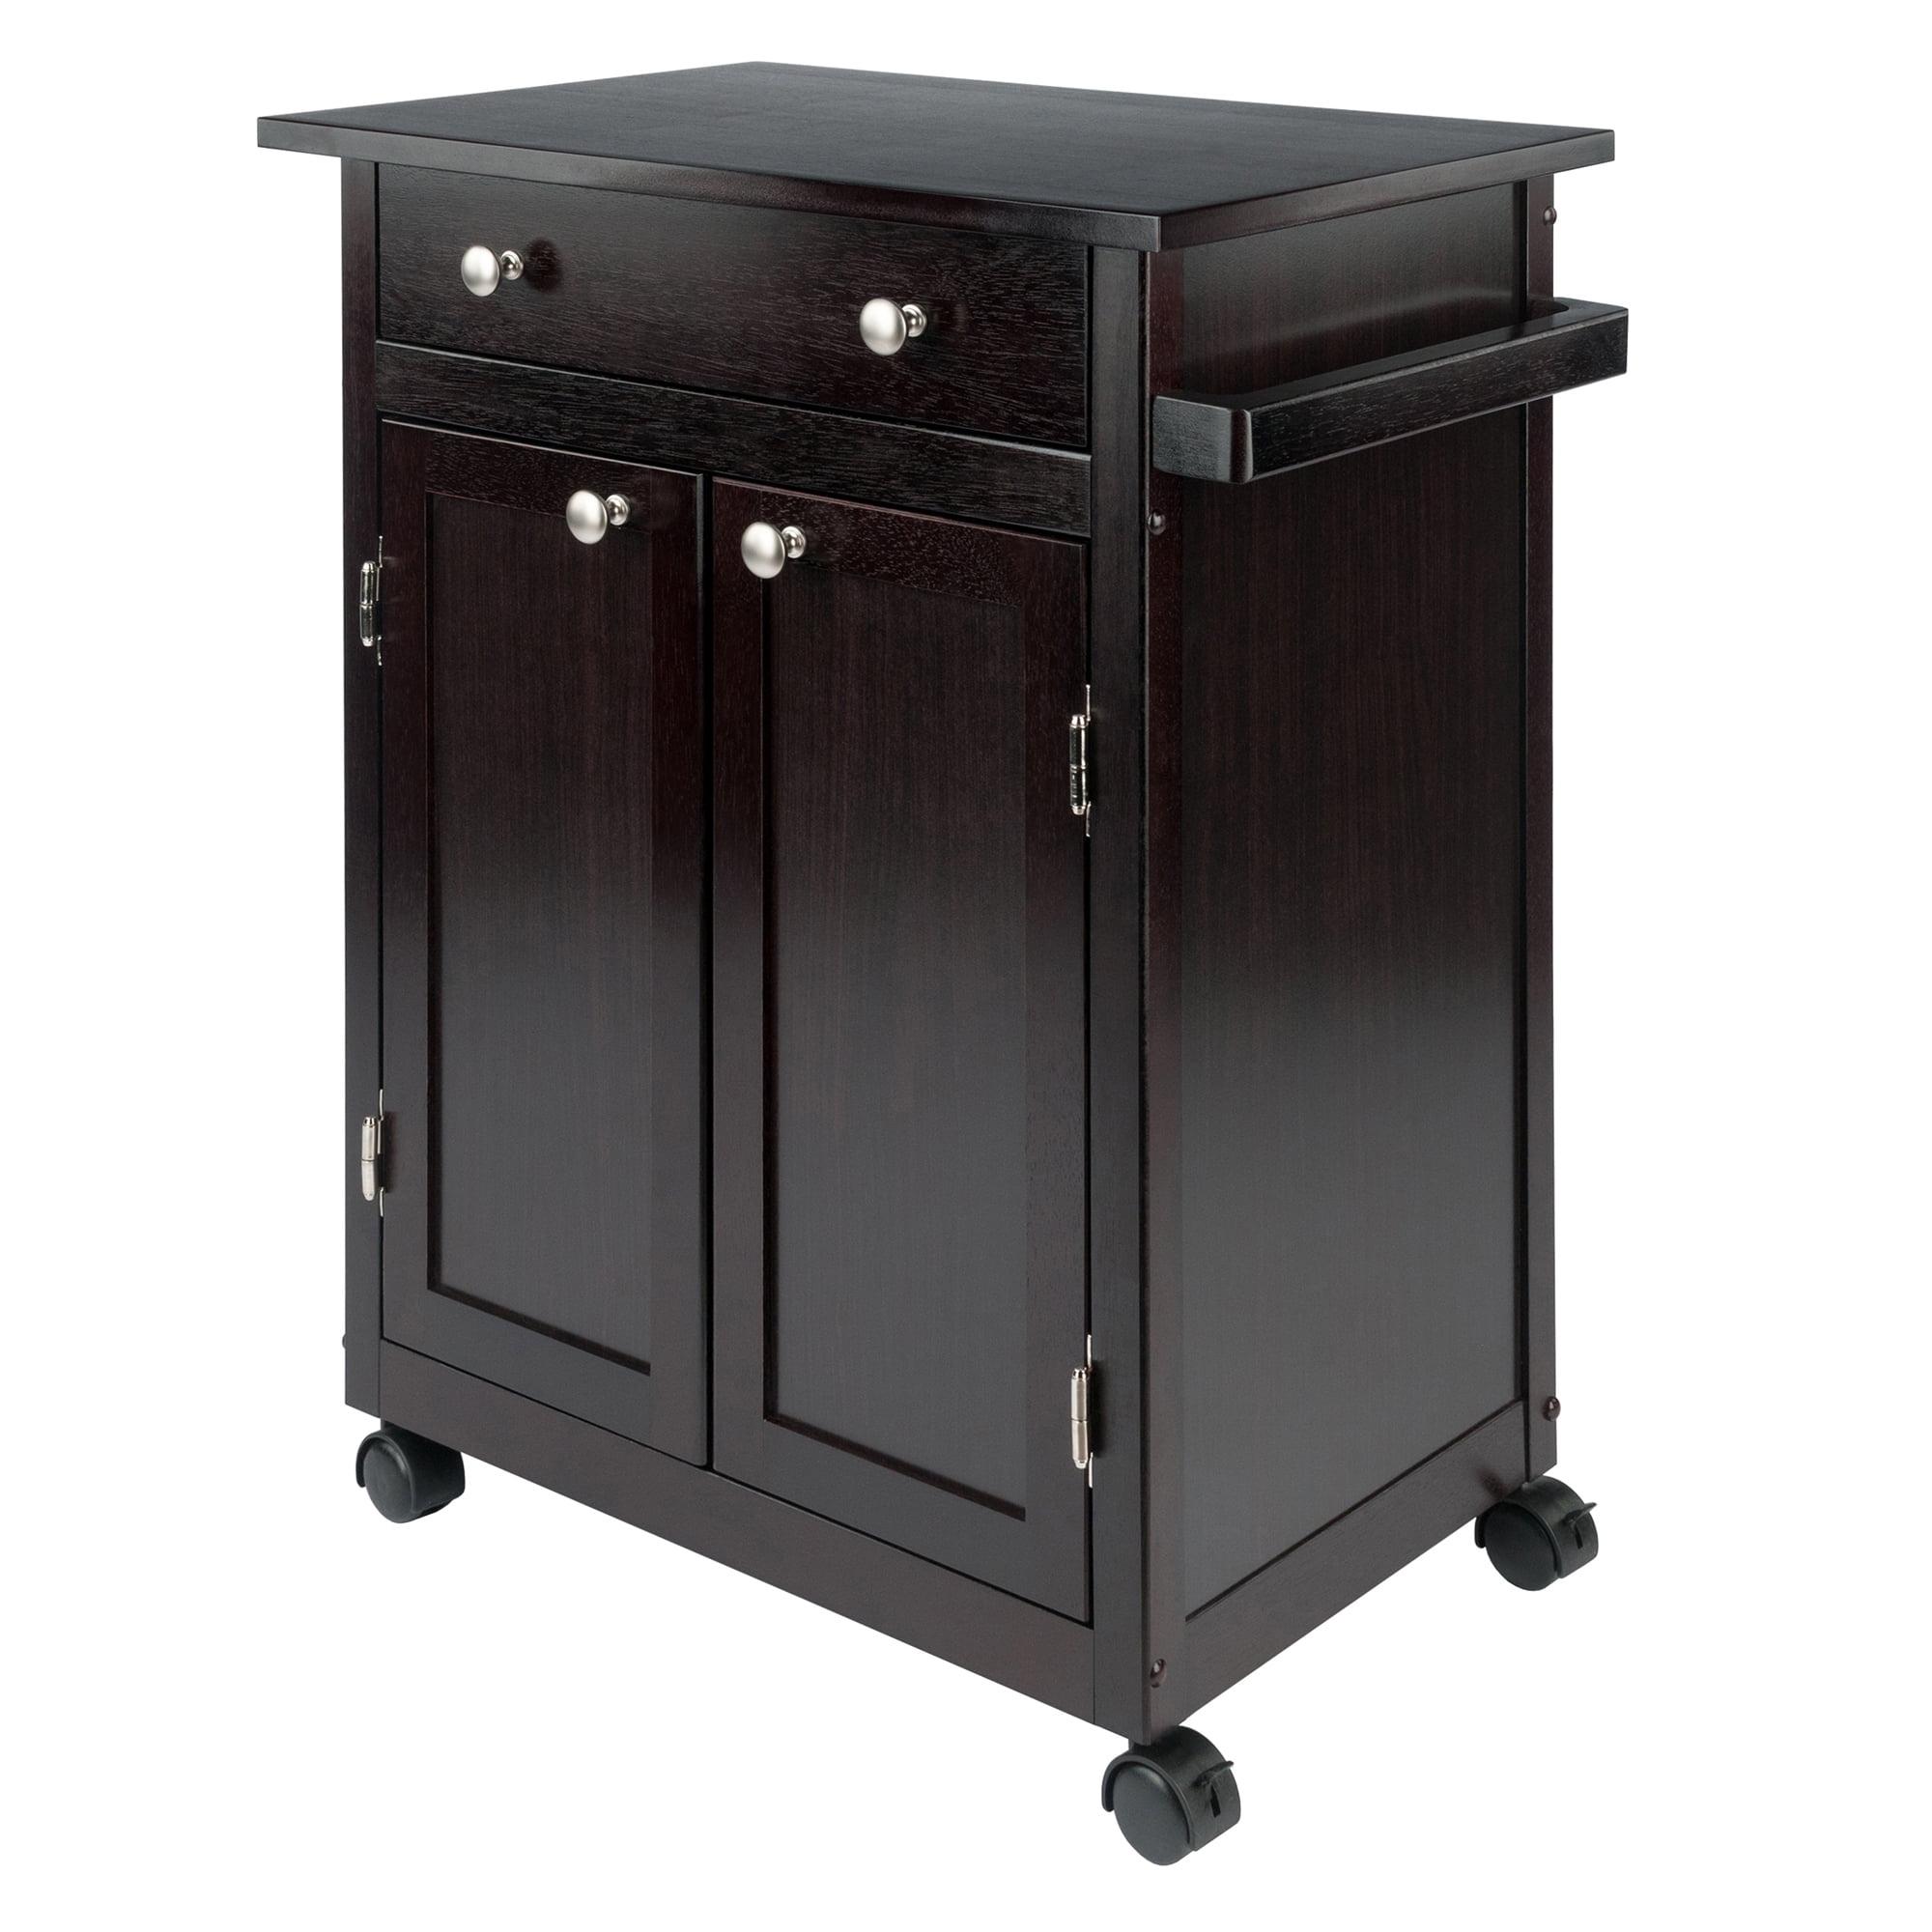 Transitional Espresso Wood Kitchen Cart with Storage and Towel Bar